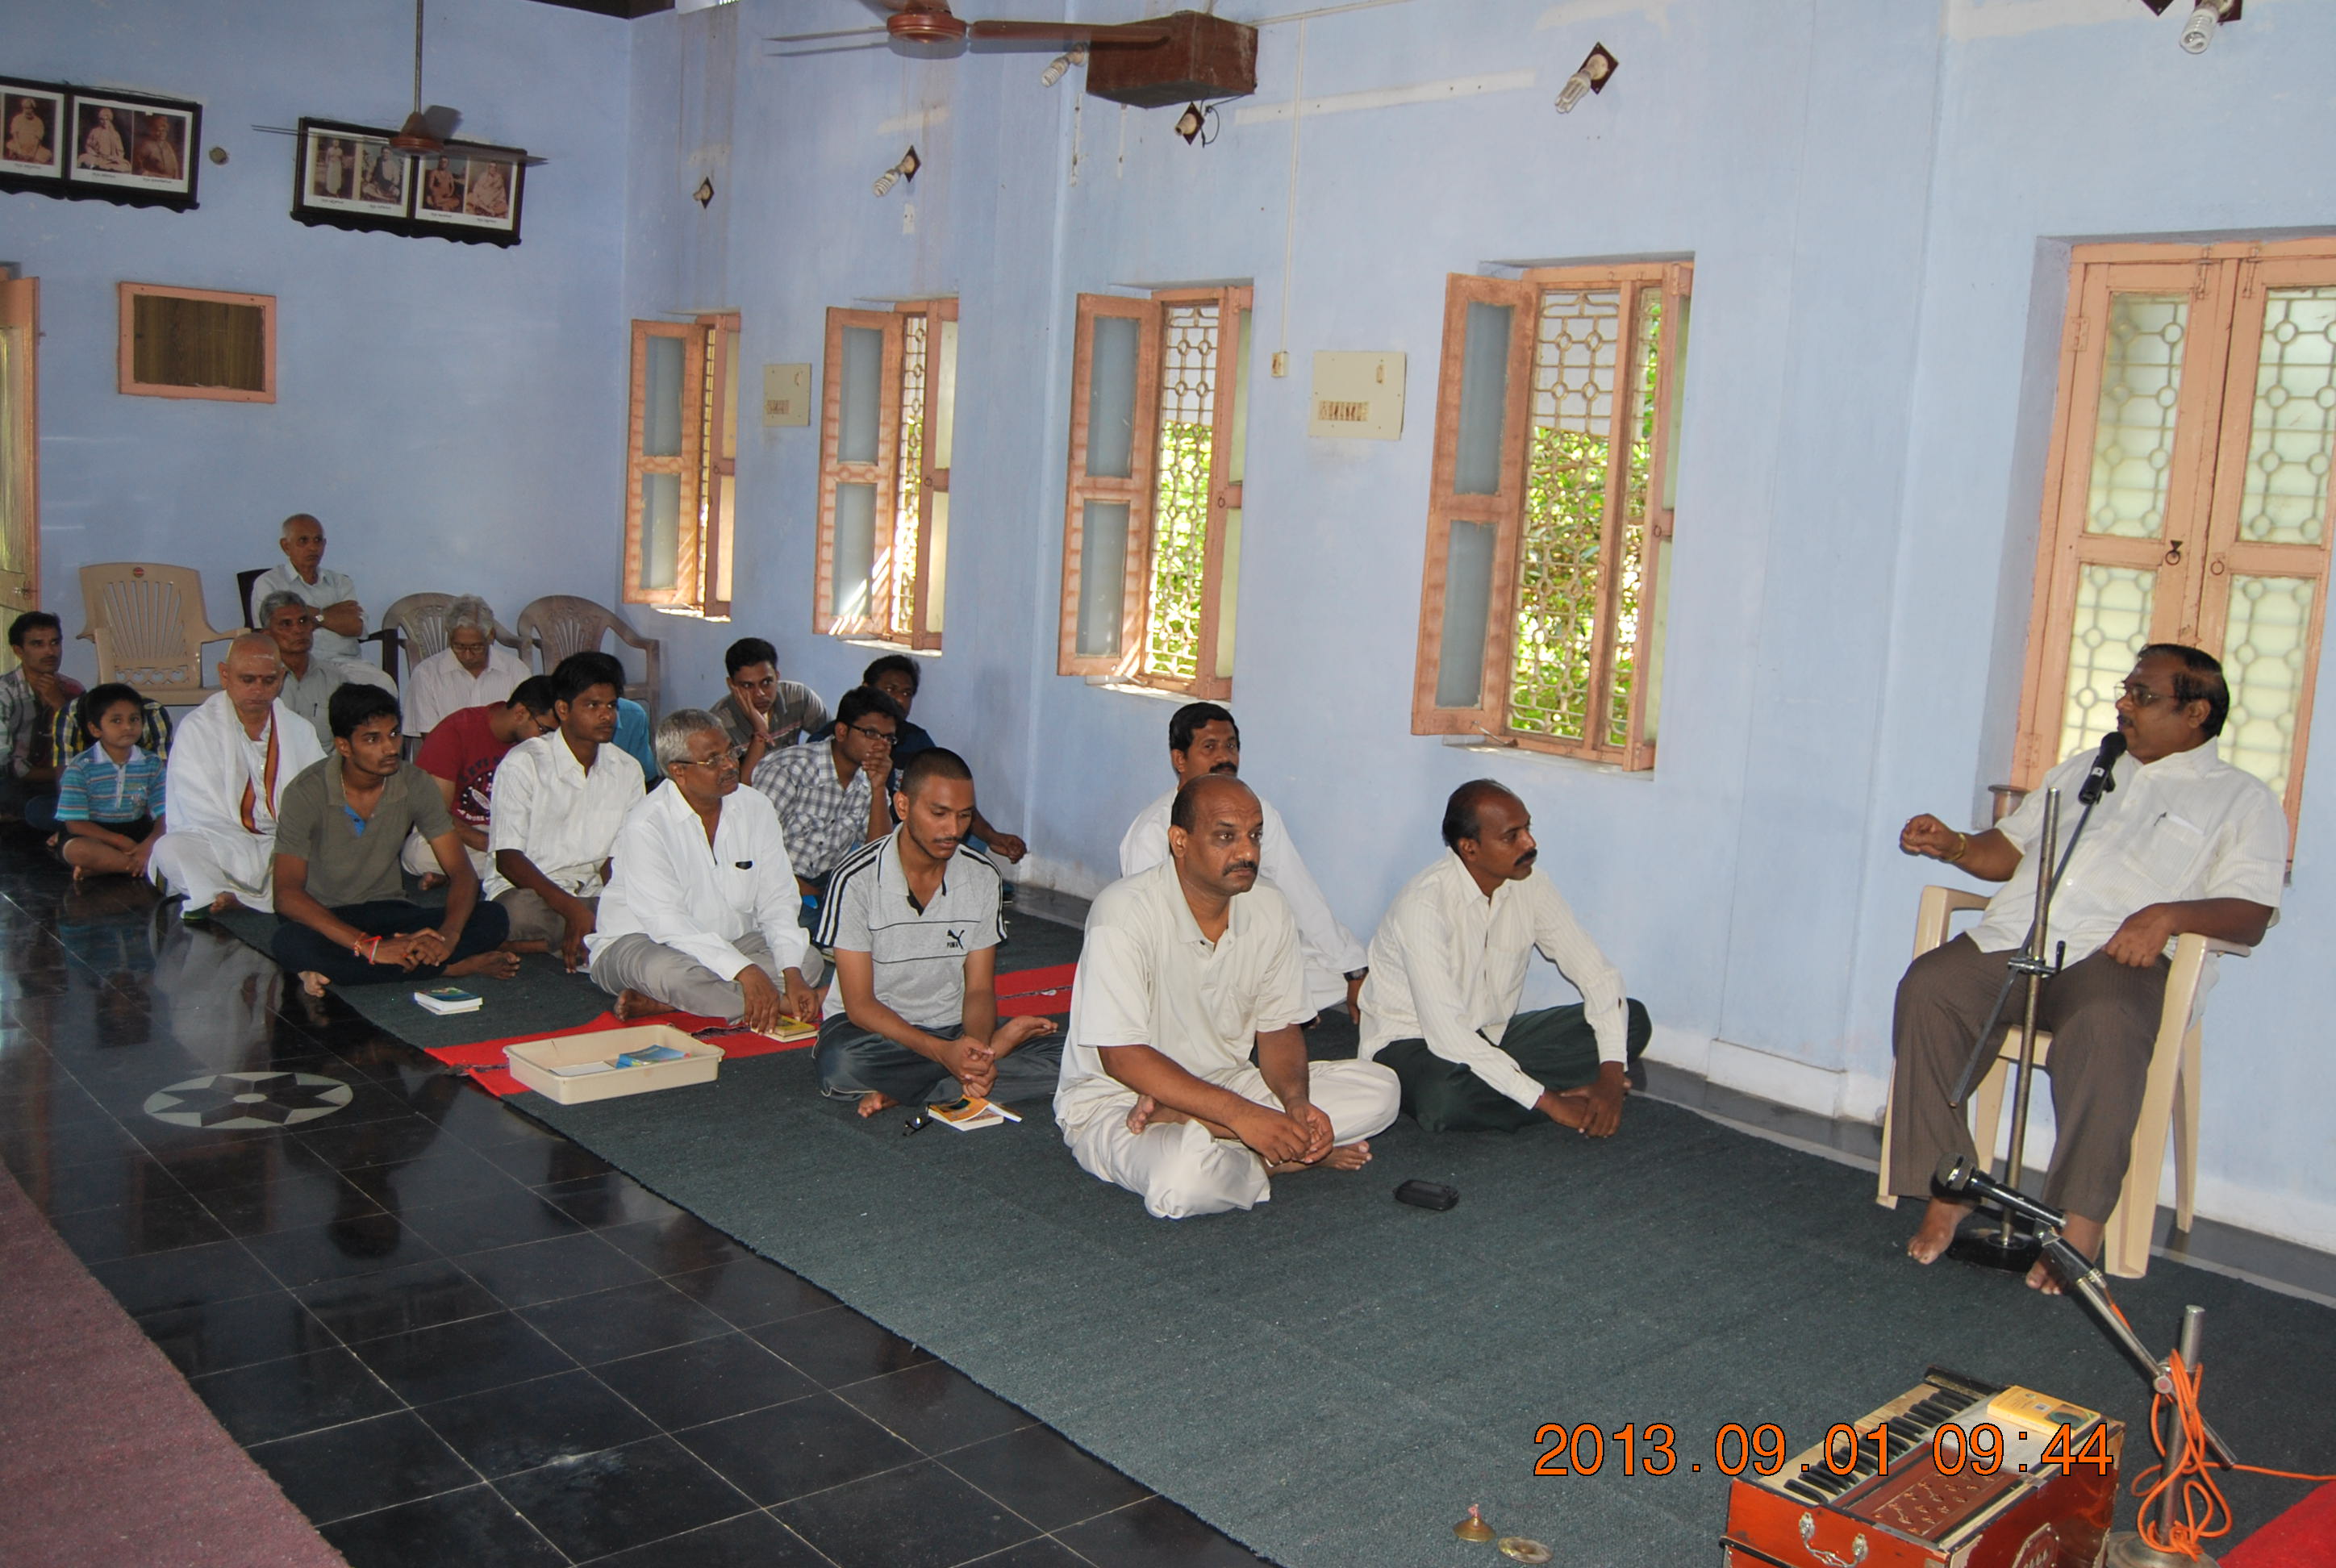 Gathering of devotees in the retreat.